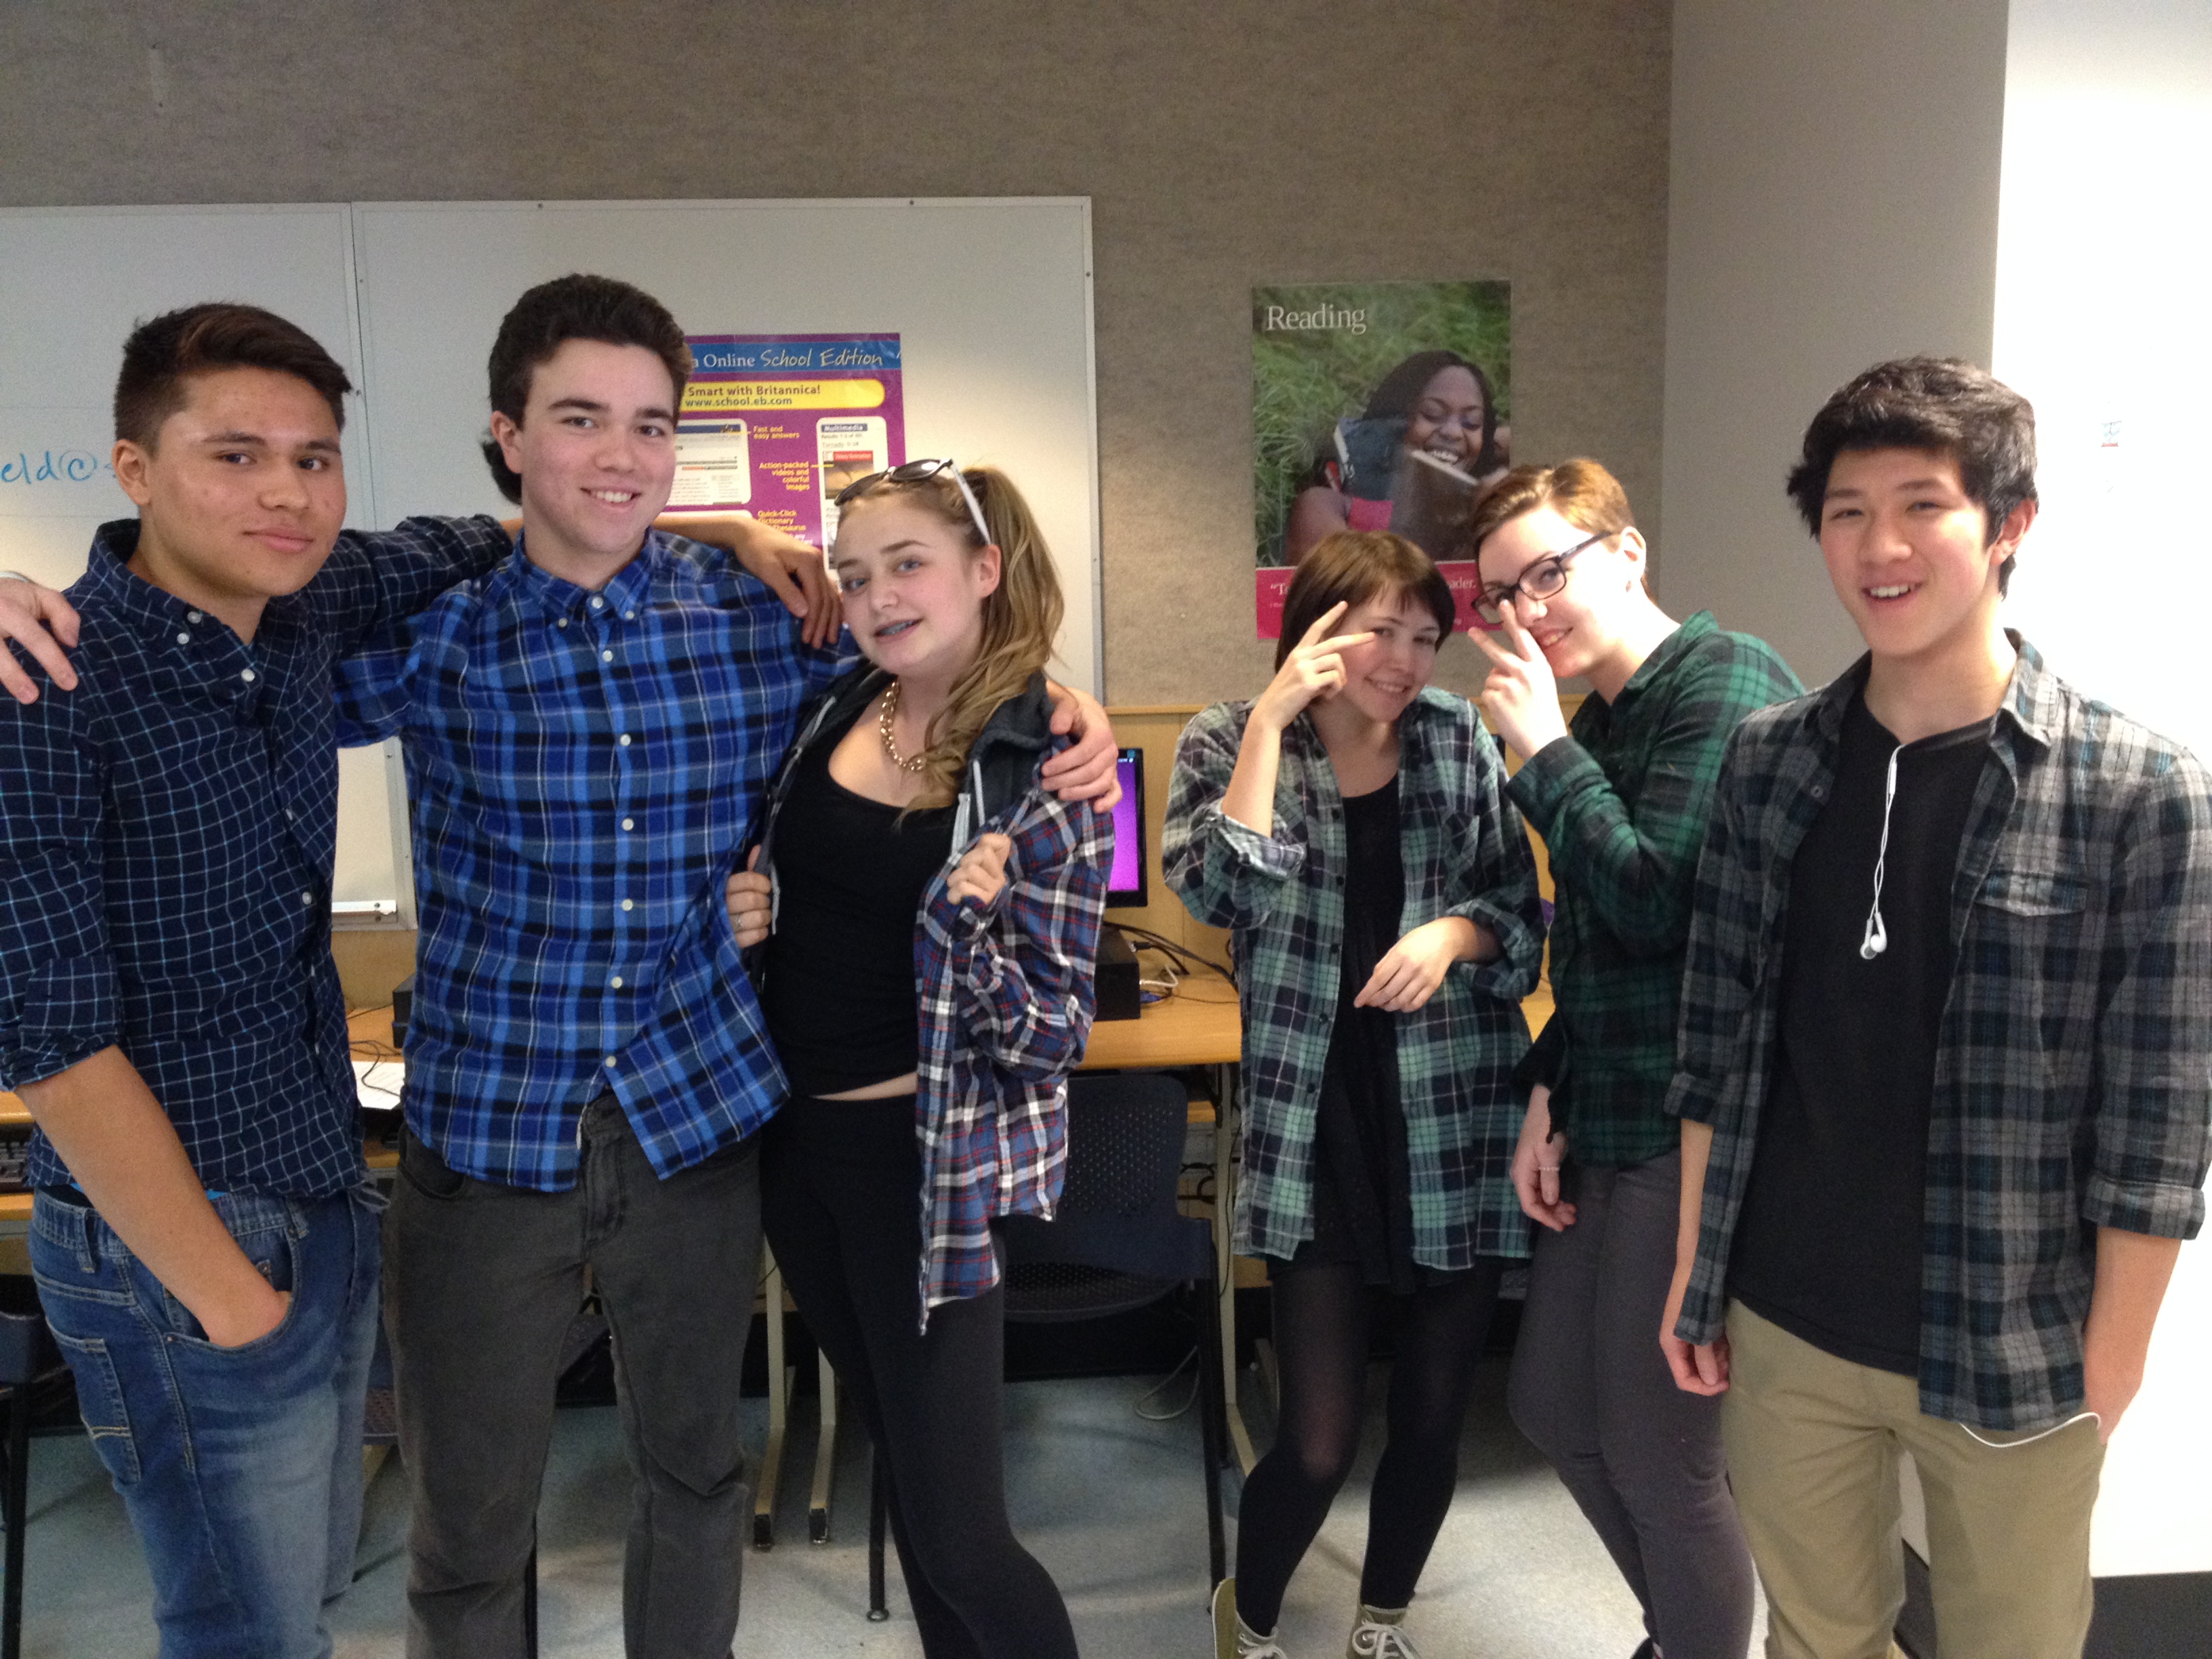 Flannel Friday